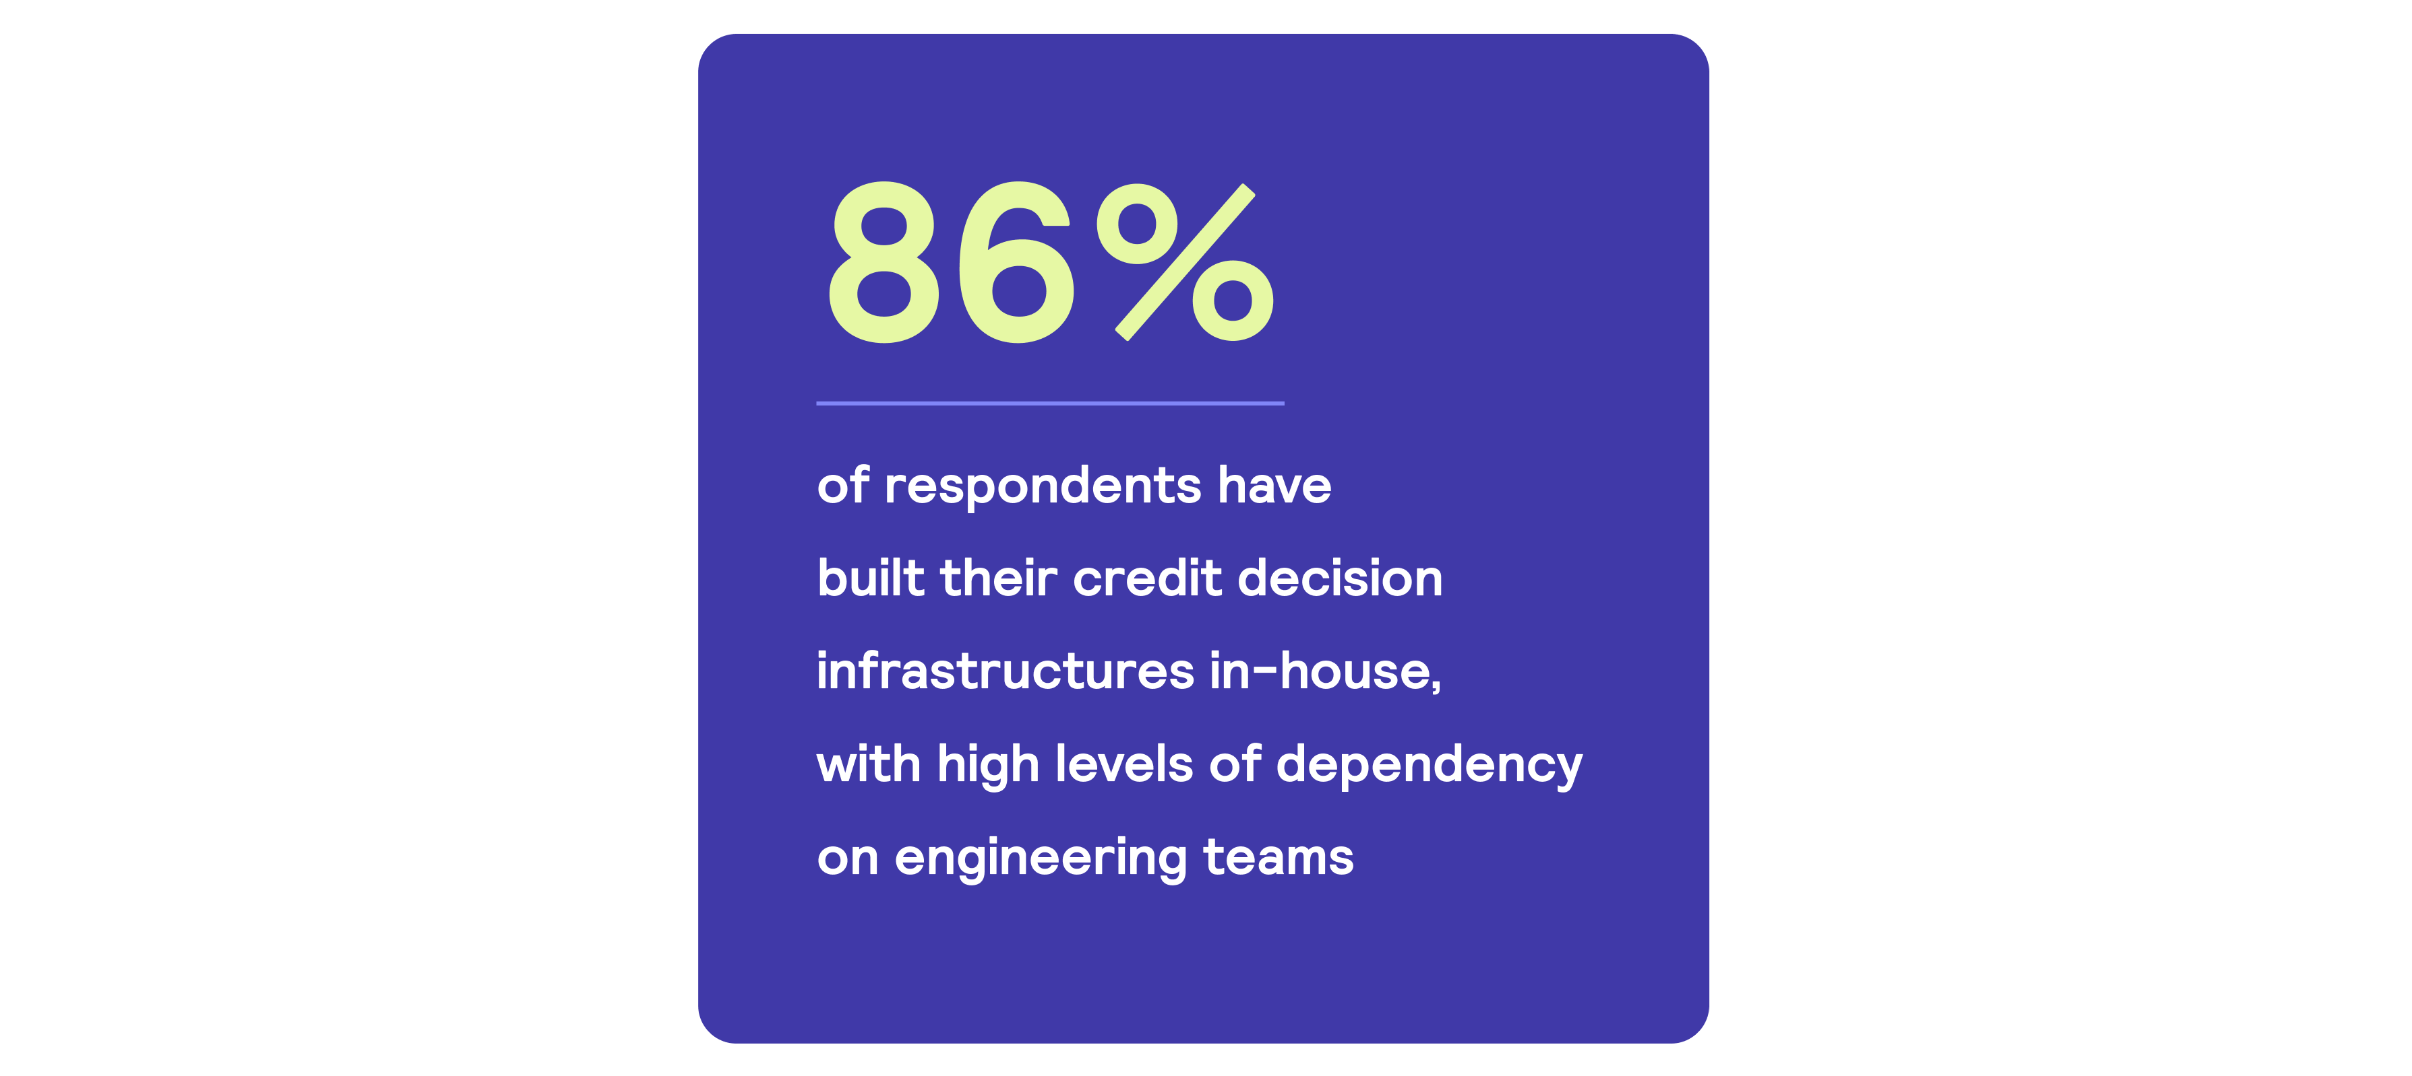 86% of lenders have in-house built credit decision engines